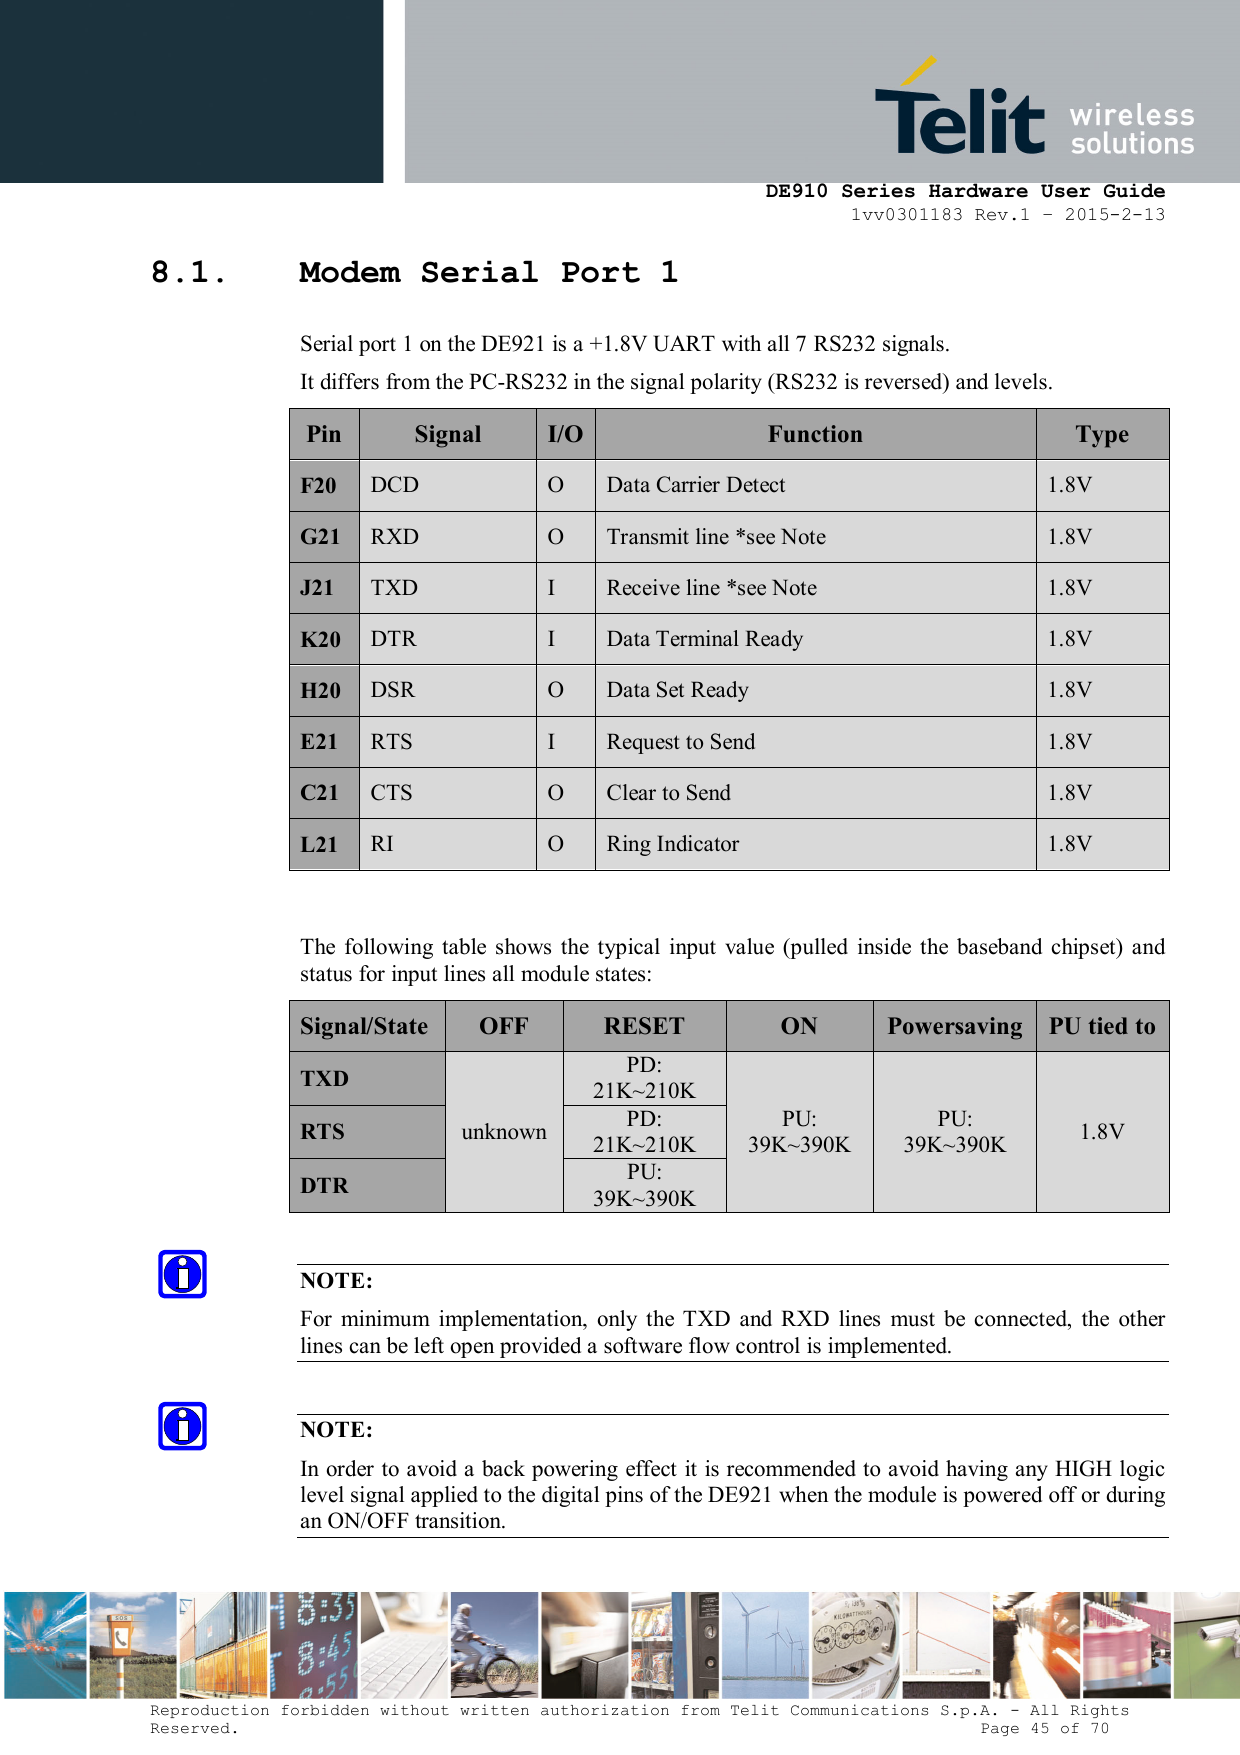      DE910 Series Hardware User Guide 1vv0301183 Rev.1 – 2015-2-13 Reproduction forbidden without written authorization from Telit Communications S.p.A. - All Rights Reserved.                                                                          Page 45 of 70 8.1. Modem Serial Port 1 Serial port 1 on the DE921 is a +1.8V UART with all 7 RS232 signals.  It differs from the PC-RS232 in the signal polarity (RS232 is reversed) and levels. Pin Signal  I/O Function  Type F20  DCD  O  Data Carrier Detect  1.8V G21 RXD  O  Transmit line *see Note  1.8V J21  TXD  I  Receive line *see Note  1.8V K20 DTR  I  Data Terminal Ready  1.8V H20 DSR  O  Data Set Ready  1.8V E21  RTS  I  Request to Send  1.8V C21  CTS  O  Clear to Send  1.8V L21  RI  O  Ring Indicator  1.8V  The  following  table  shows  the  typical  input  value  (pulled  inside  the  baseband  chipset)  and status for input lines all module states: Signal/State OFF  RESET  ON  Powersaving PU tied to TXD unknown PD: 21K~210K PU: 39K~390K PU: 39K~390K  1.8V RTS PD: 21K~210K DTR PU: 39K~390K  NOTE: For  minimum  implementation,  only  the  TXD  and  RXD  lines  must  be  connected,  the  other lines can be left open provided a software flow control is implemented.  NOTE: In order to avoid a back powering effect it is recommended to avoid having any HIGH logic level signal applied to the digital pins of the DE921 when the module is powered off or during an ON/OFF transition. 